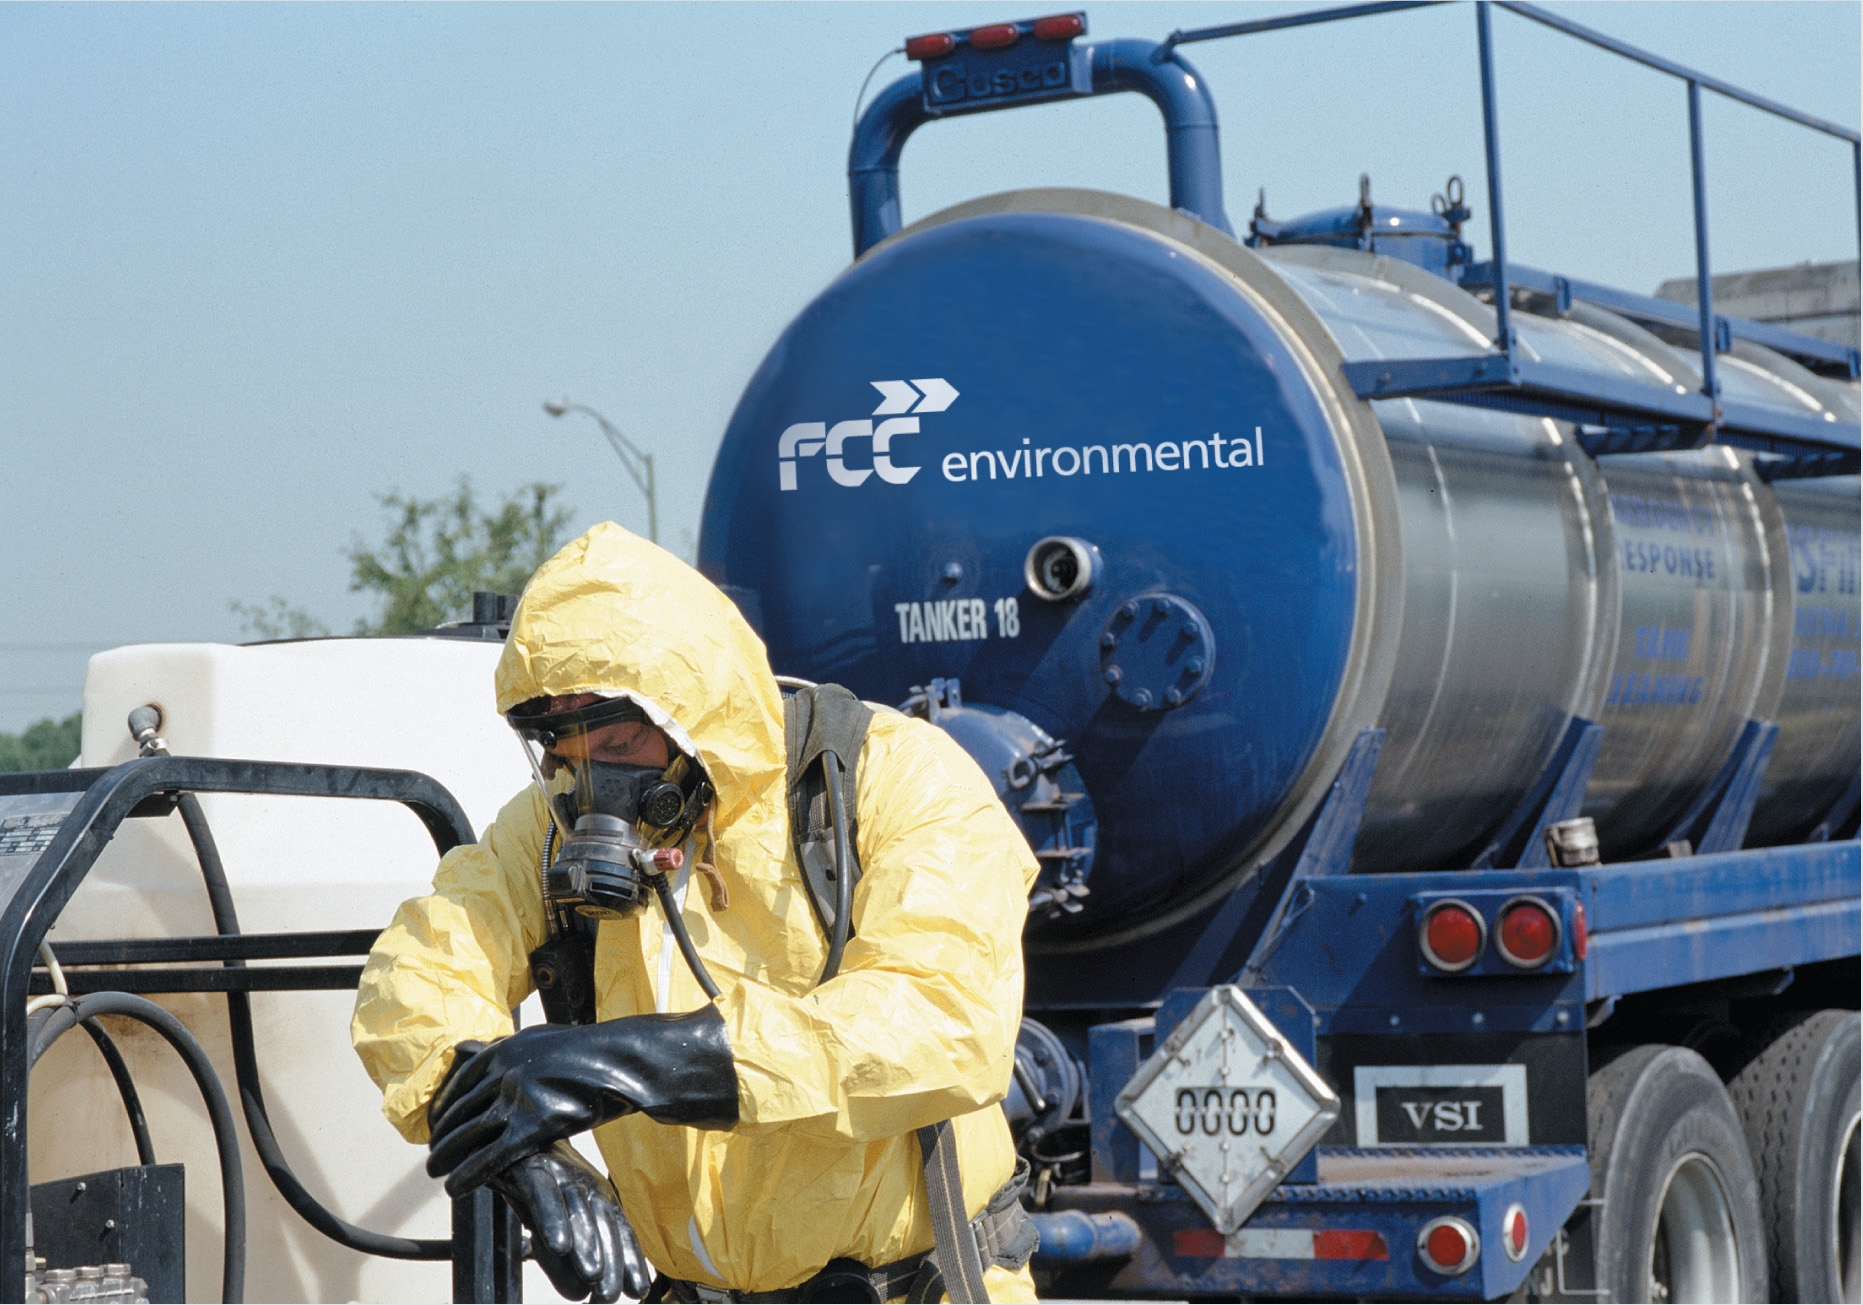 FCC sells its North American business for used oil collection and recycling to Heritage Crystal Clean for 70 million euro